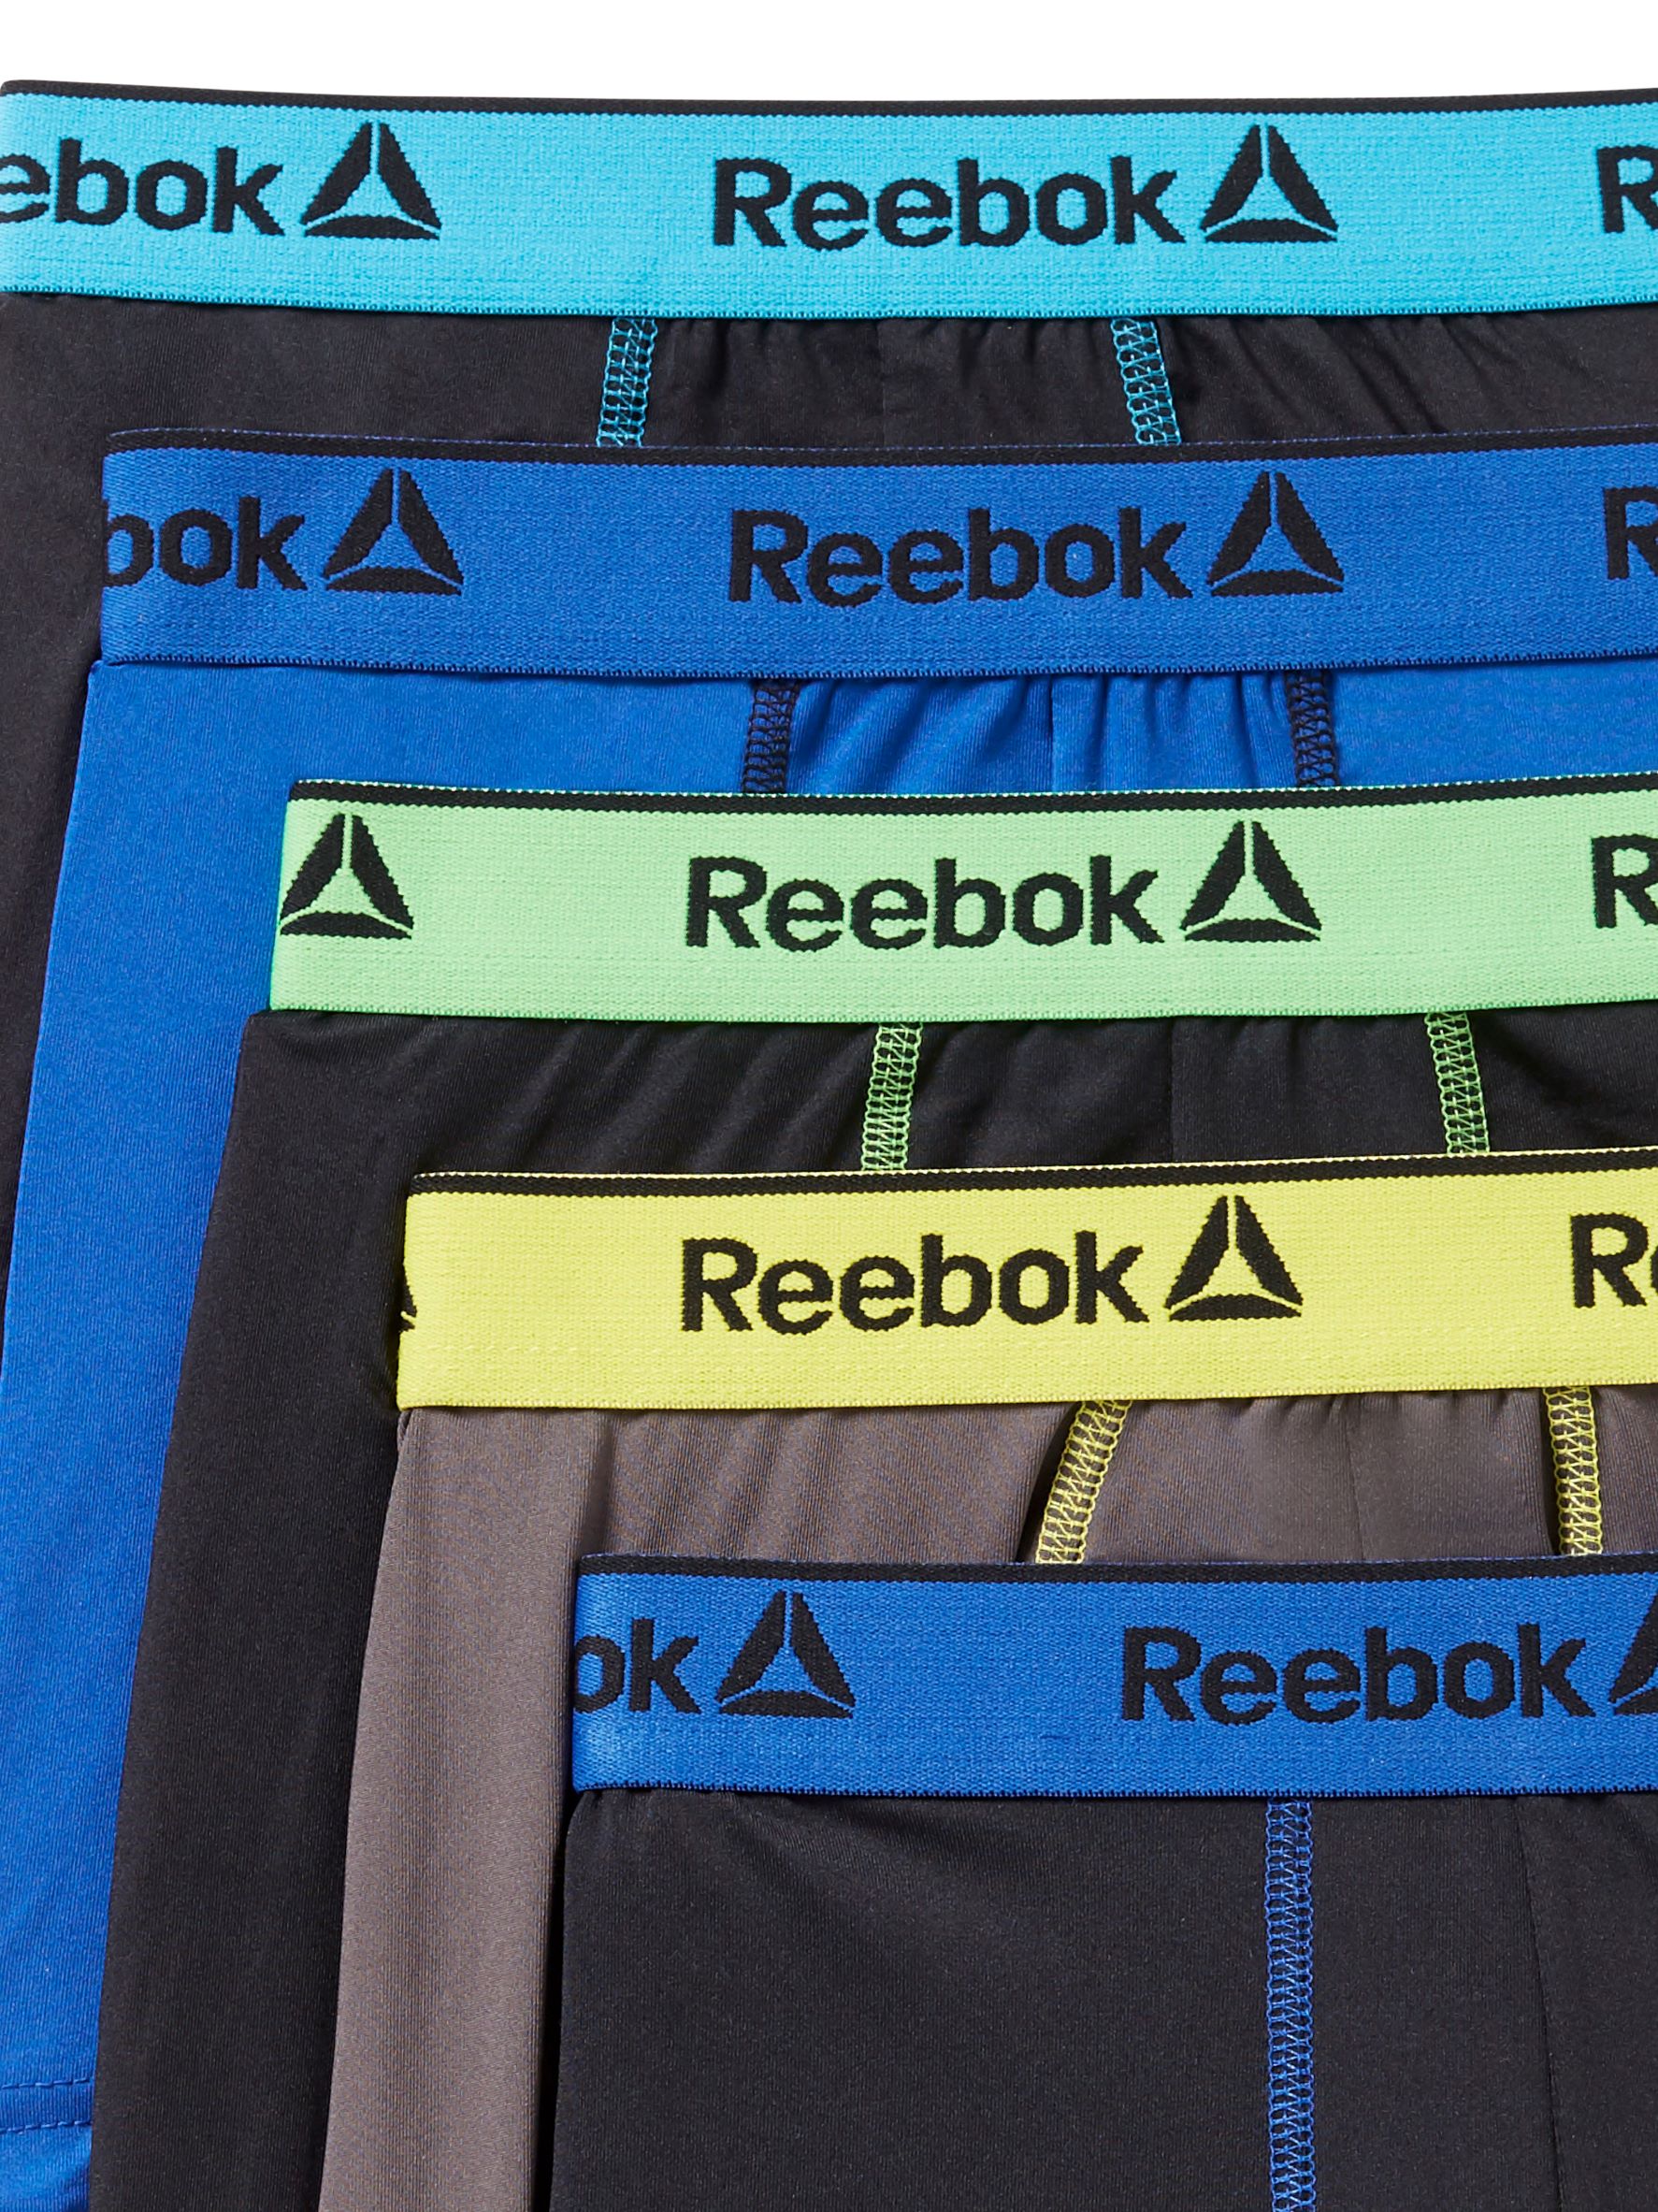 Reebok Boys' Performance Boxer Briefs, 5 Pack, Sizes S-XL - image 4 of 6